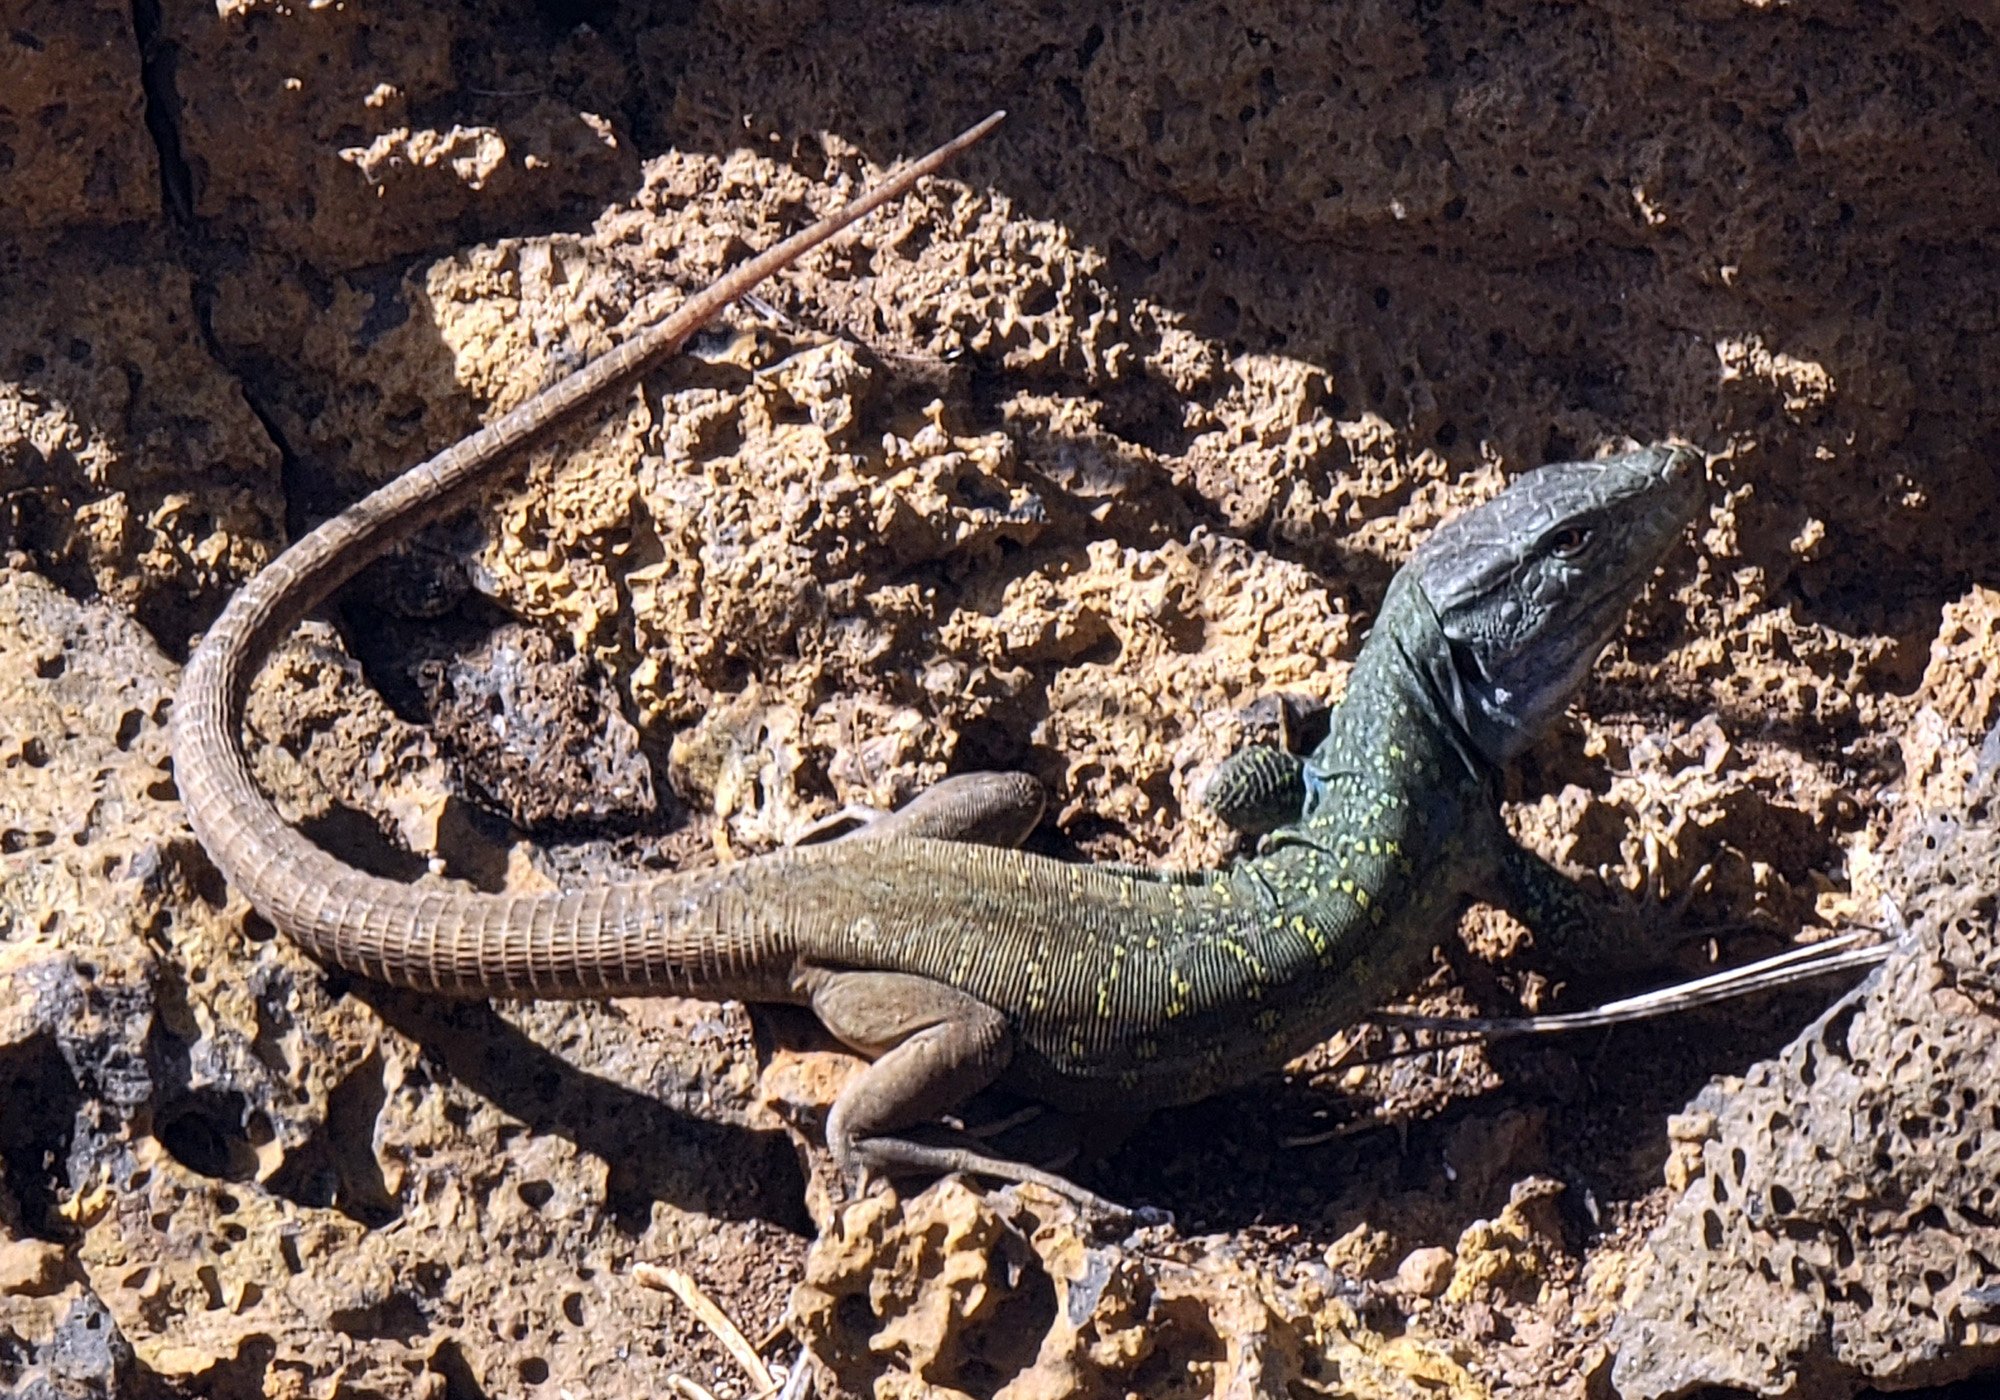 These guys are called "Tenerife Lizards". They are "the world's largest wall lizard". So like 8 inches.... 